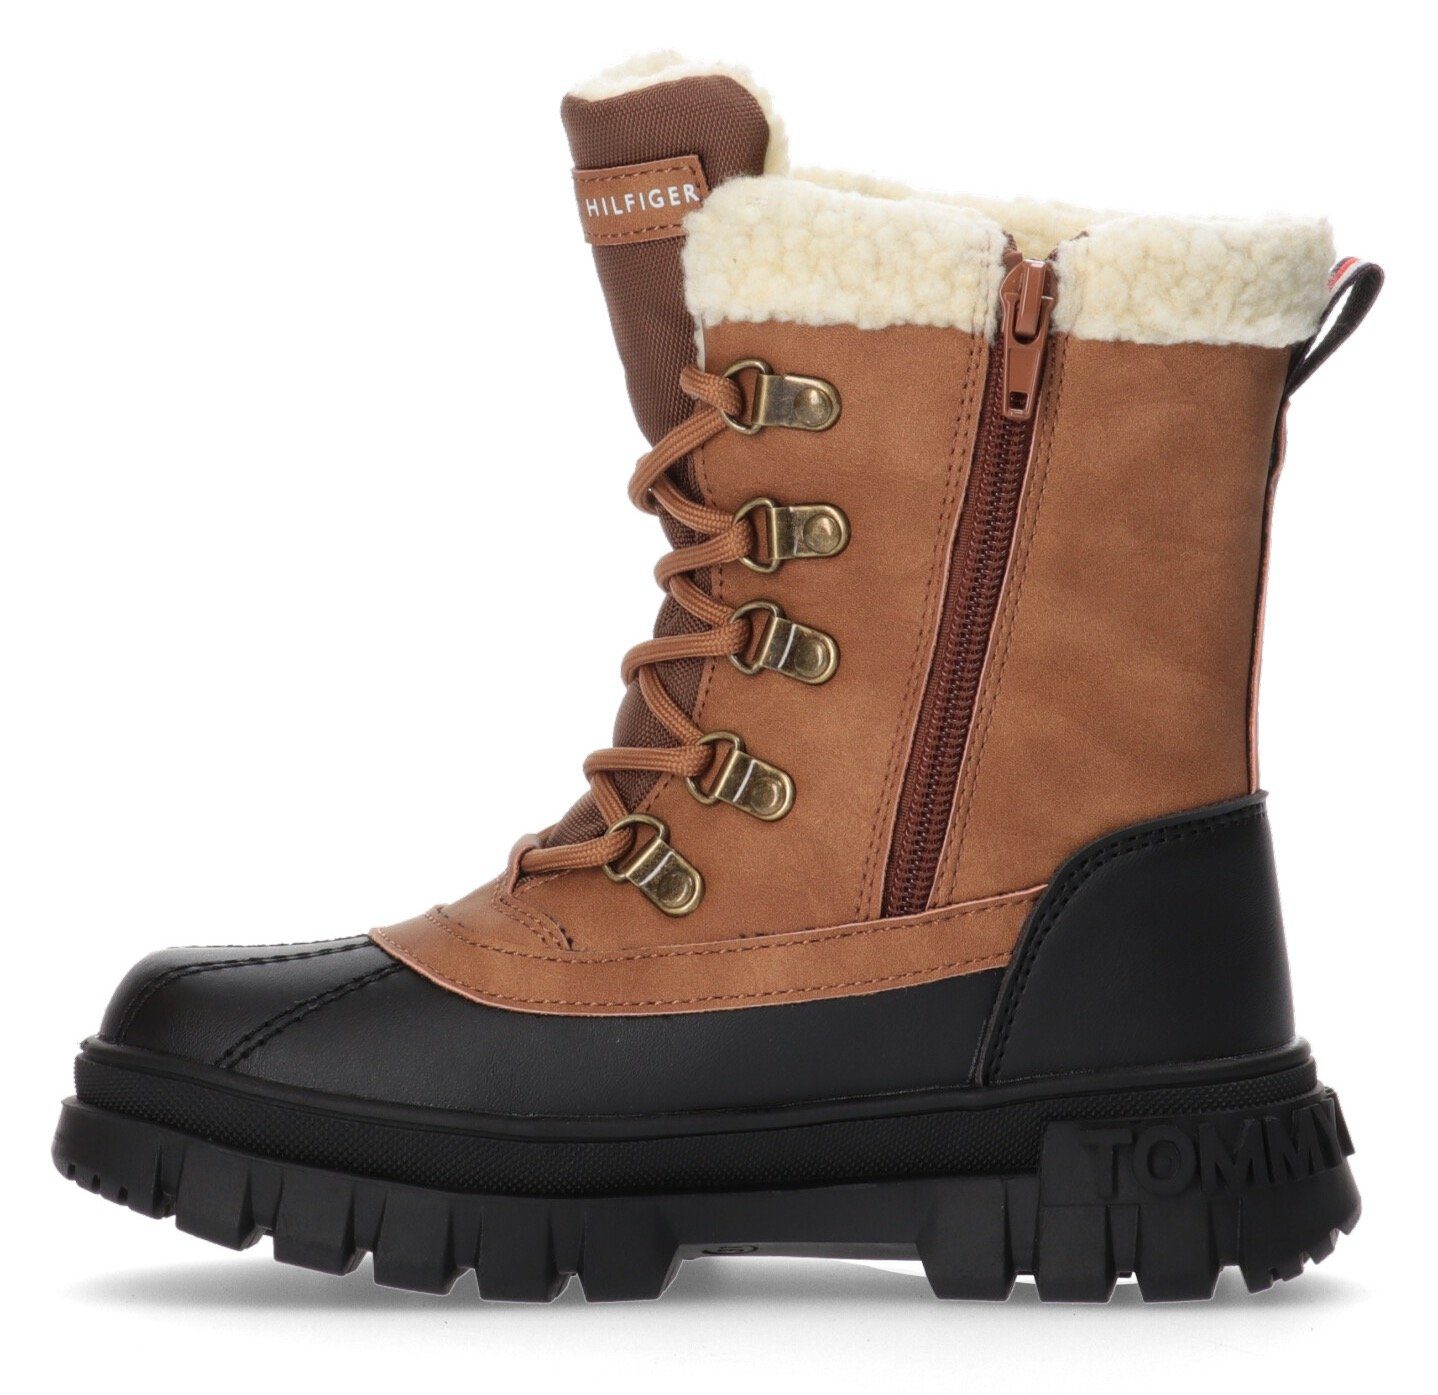 Tommy Hilfiger Thermostiefel LACE-UP BOOT Warmfutter mit Snowboots